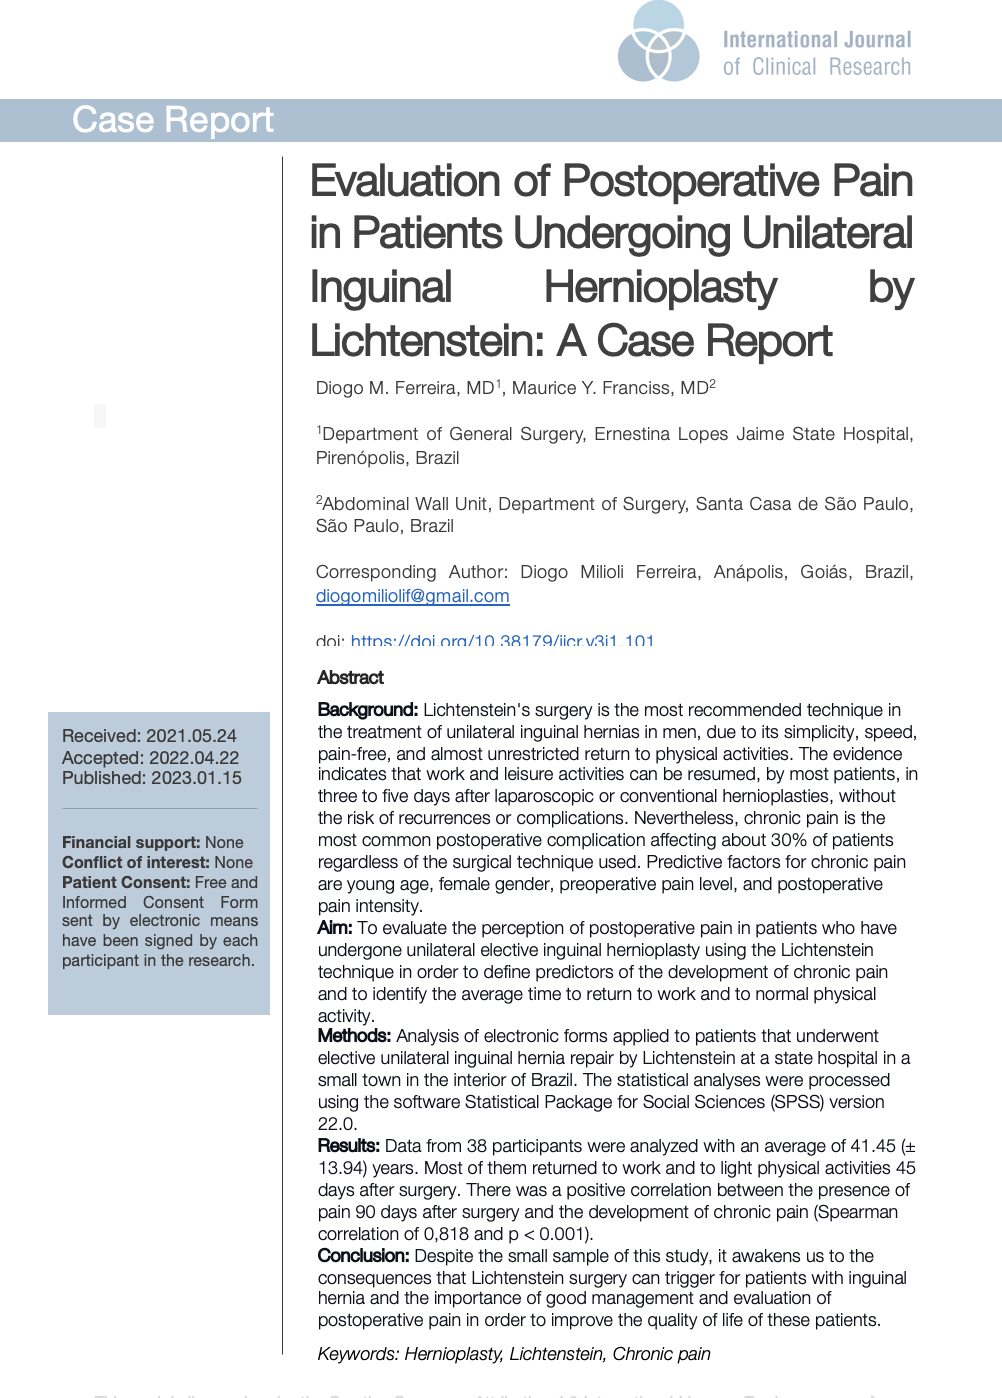 Evaluation of Postoperative Pain in Patients Undergoing Unilateral Inguinal Hernioplasty by Lichtenstein: A Case Report